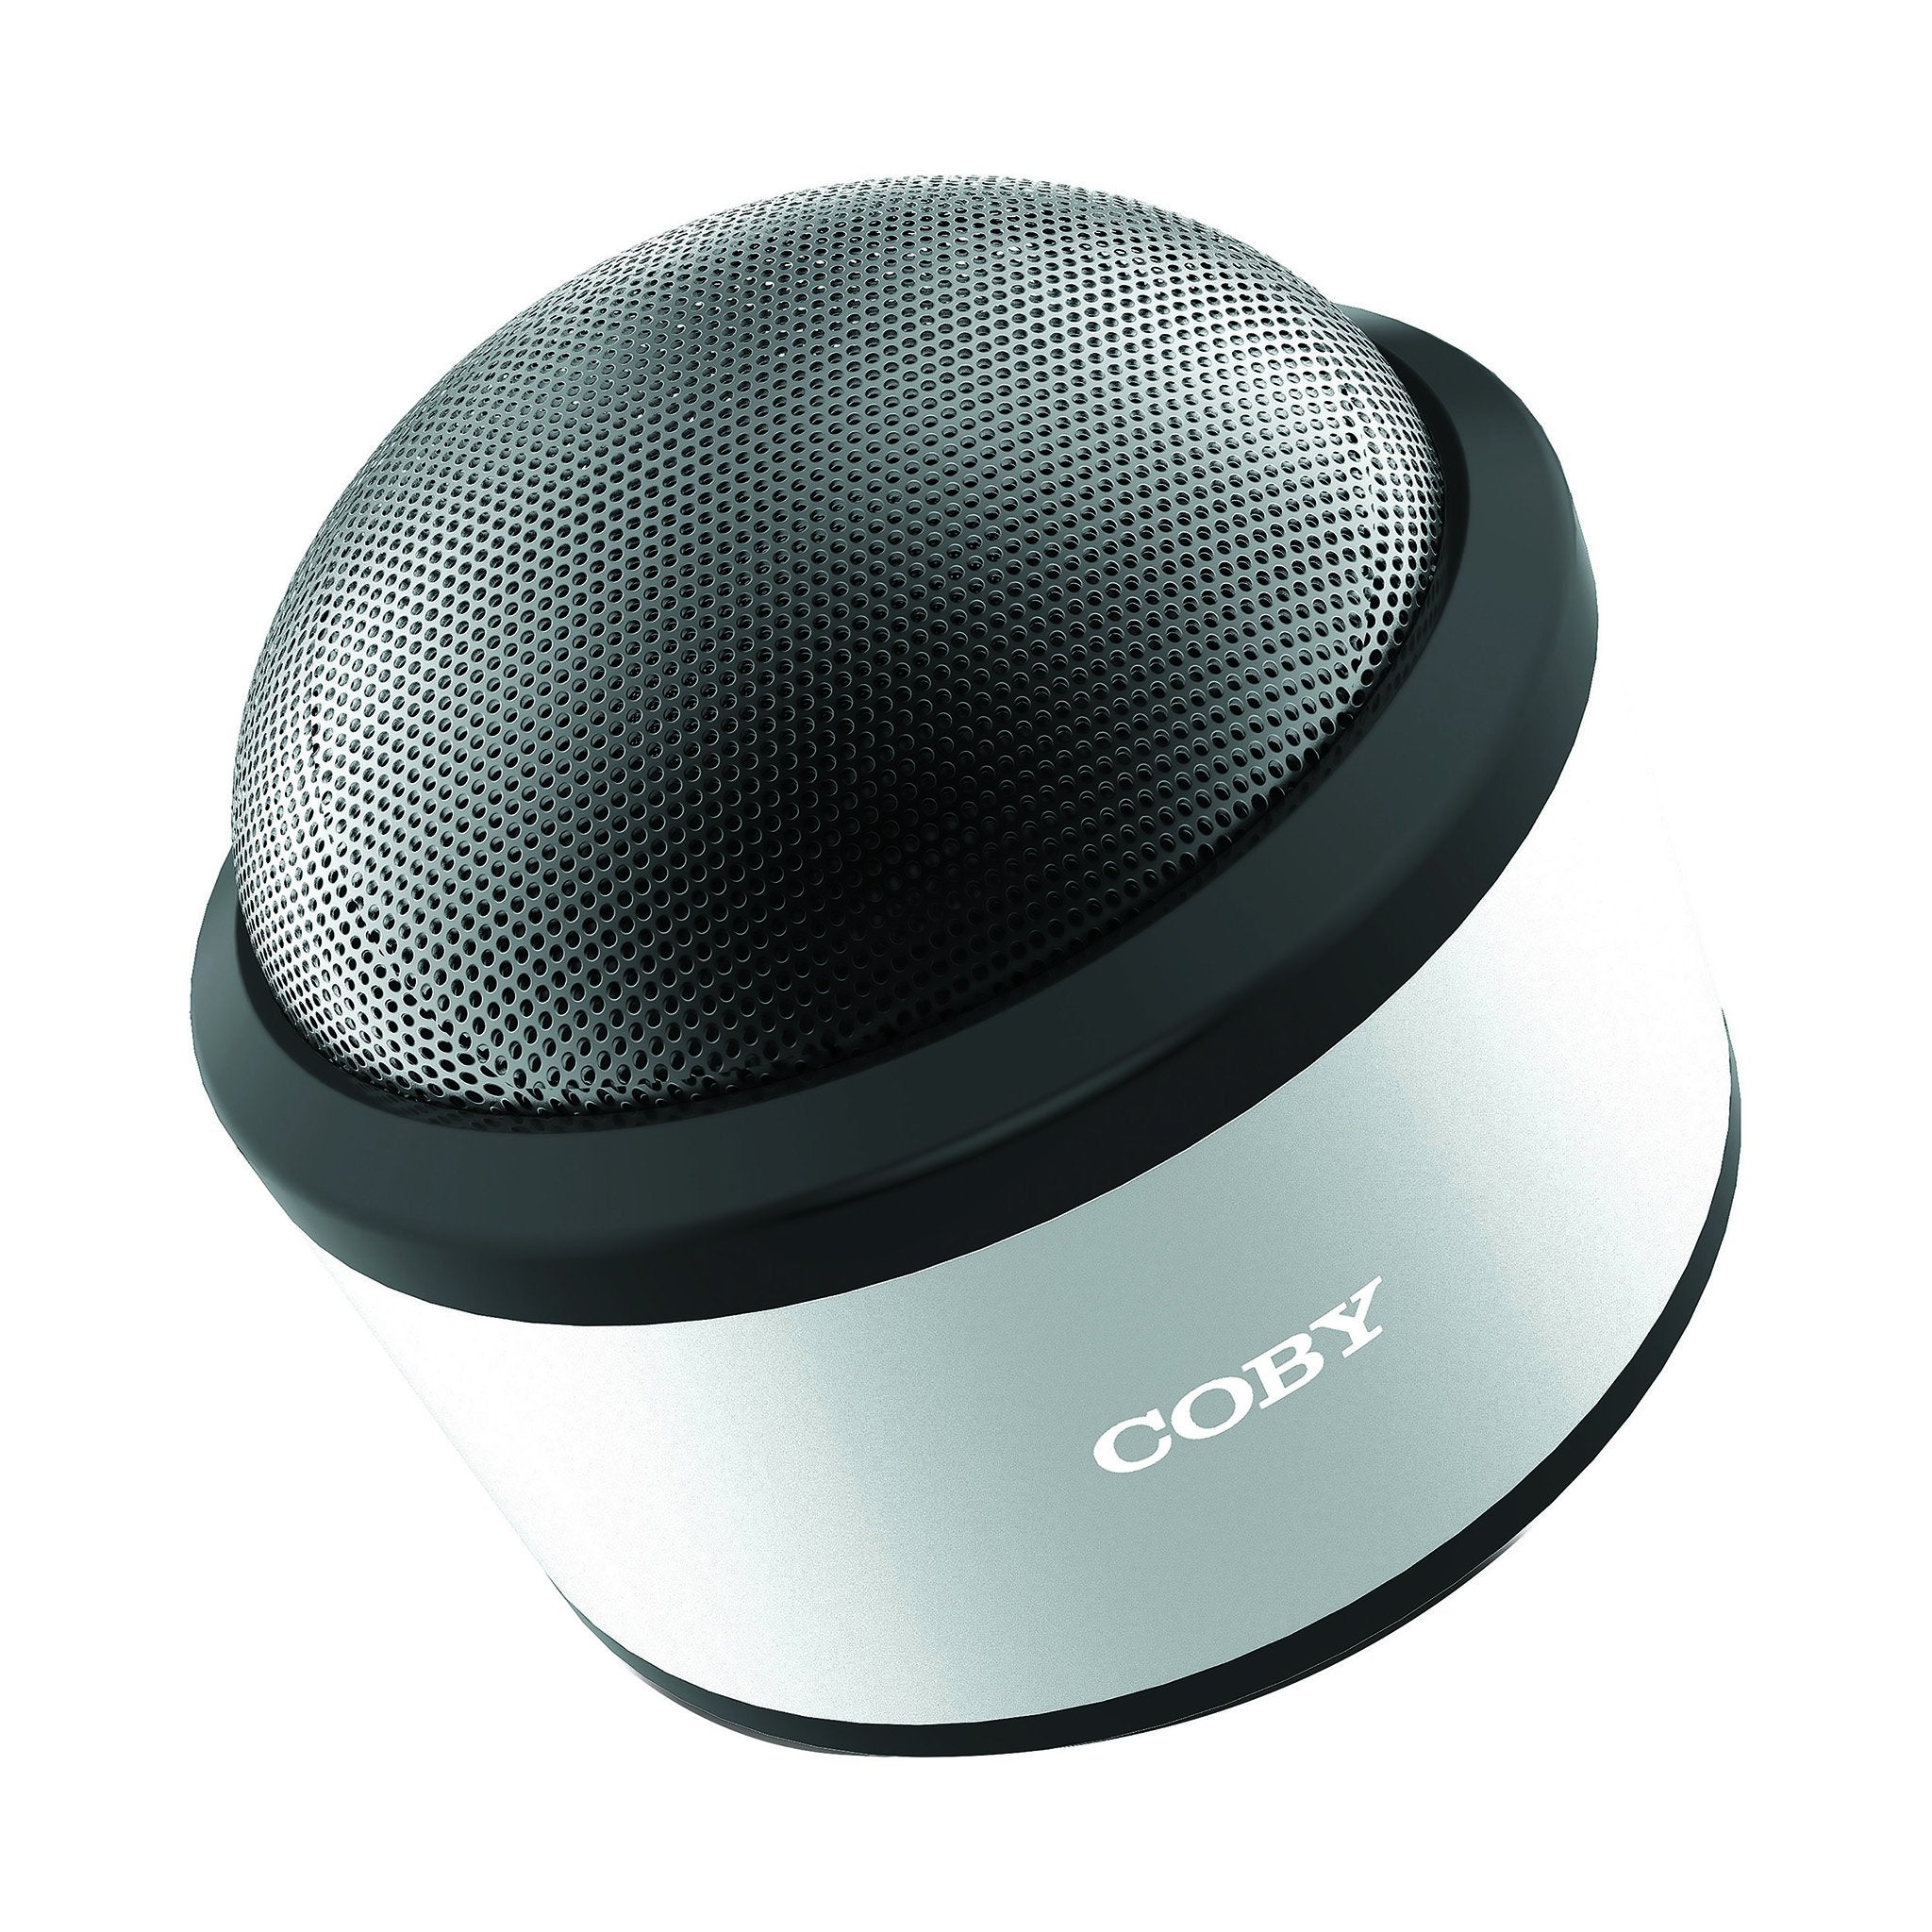 DYNA DOME BLUETOOTH STEREO SPEAKER